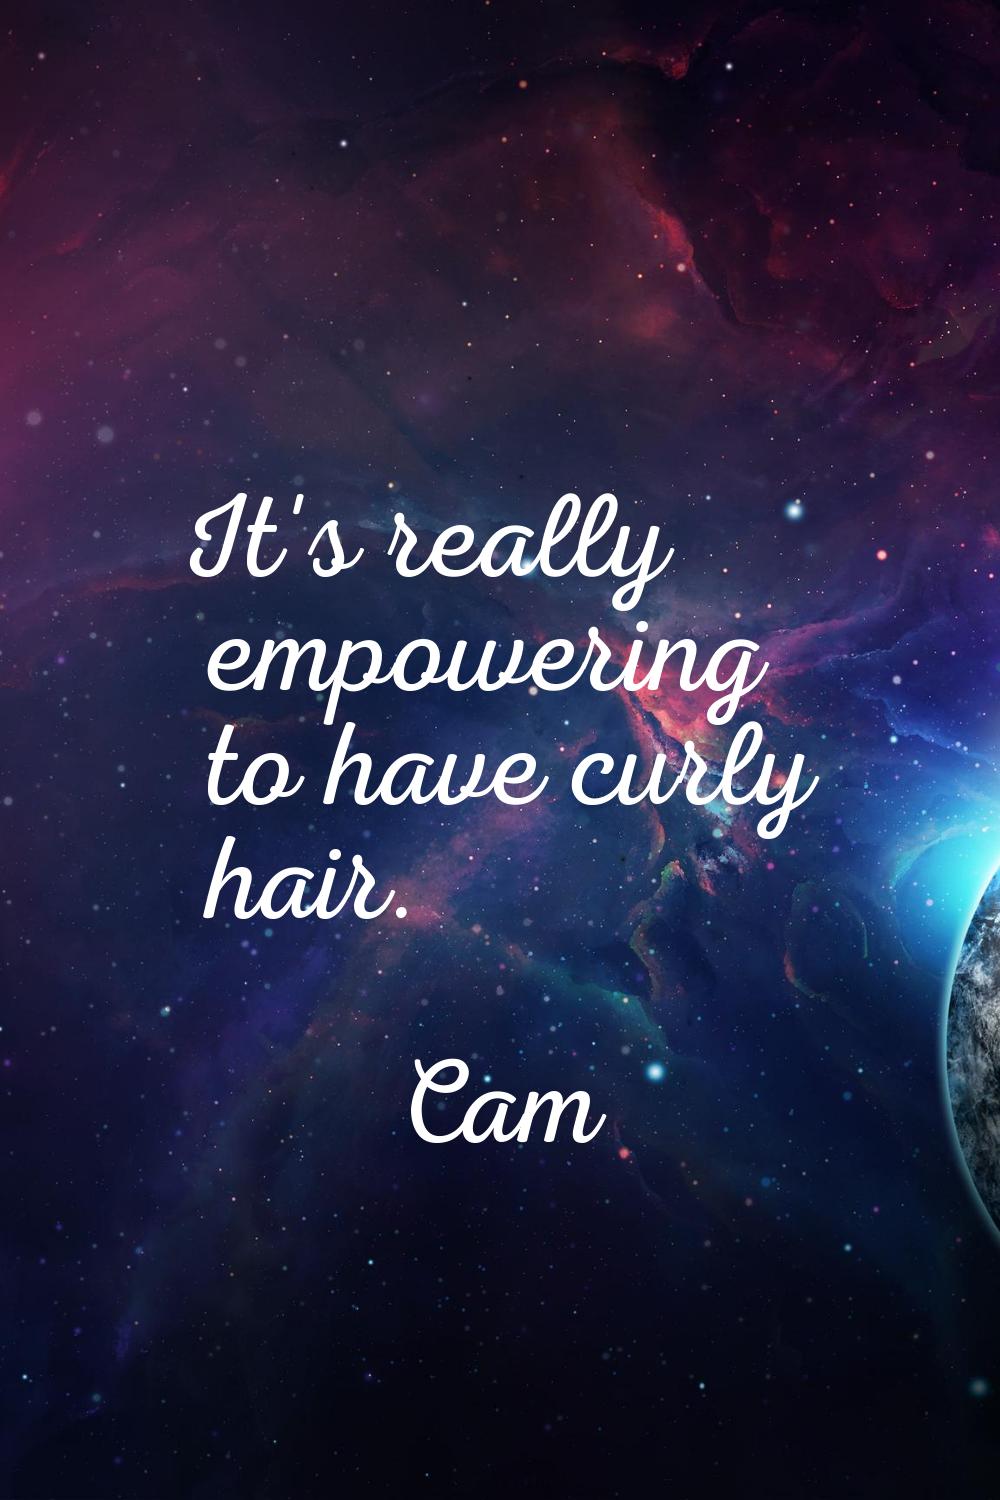 It's really empowering to have curly hair.